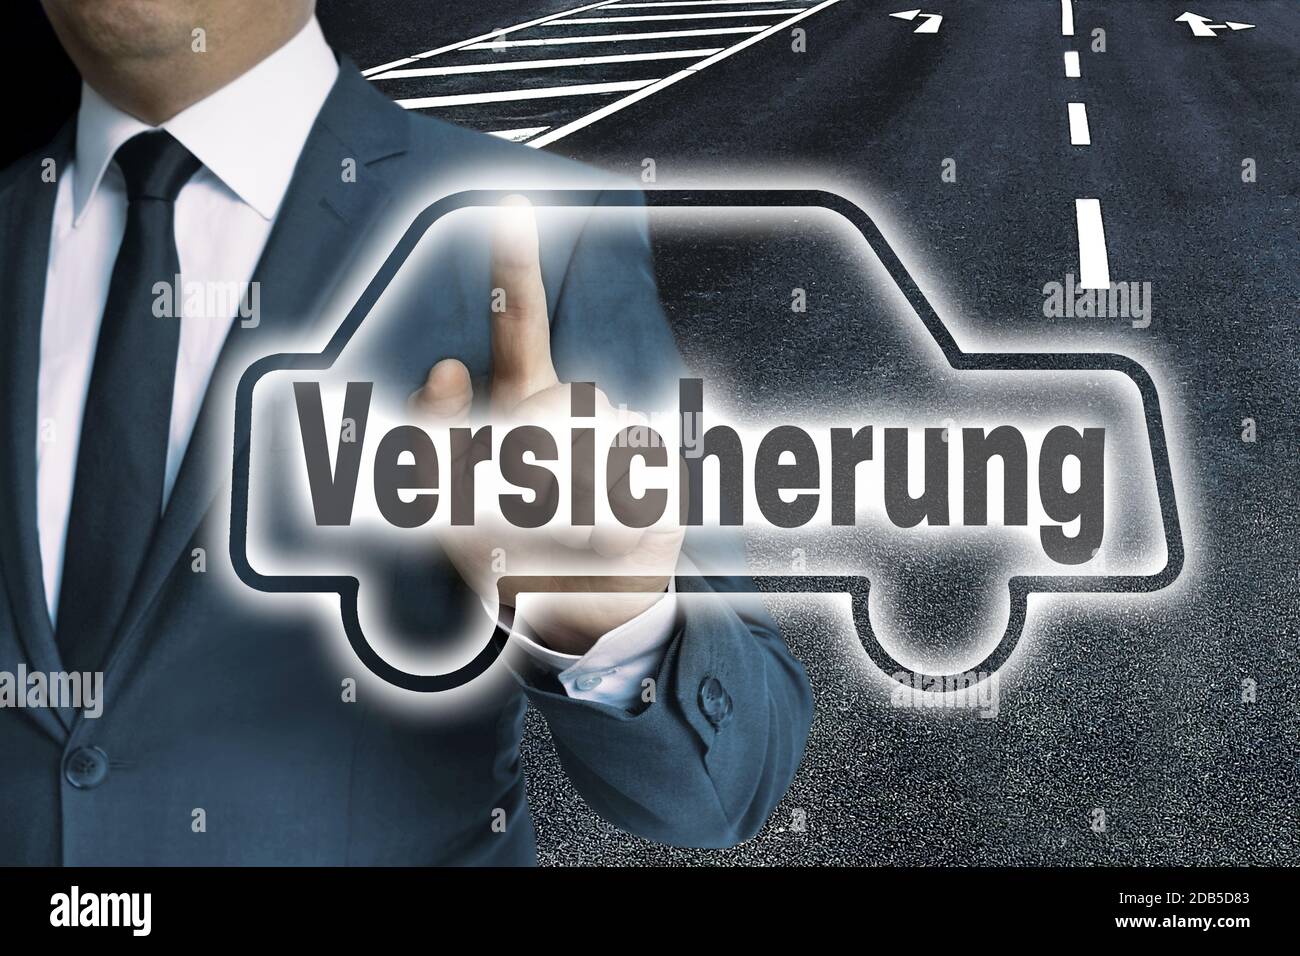 Versicherung (in german Insurance) car touchscreen is operated by man concept. Stock Photo